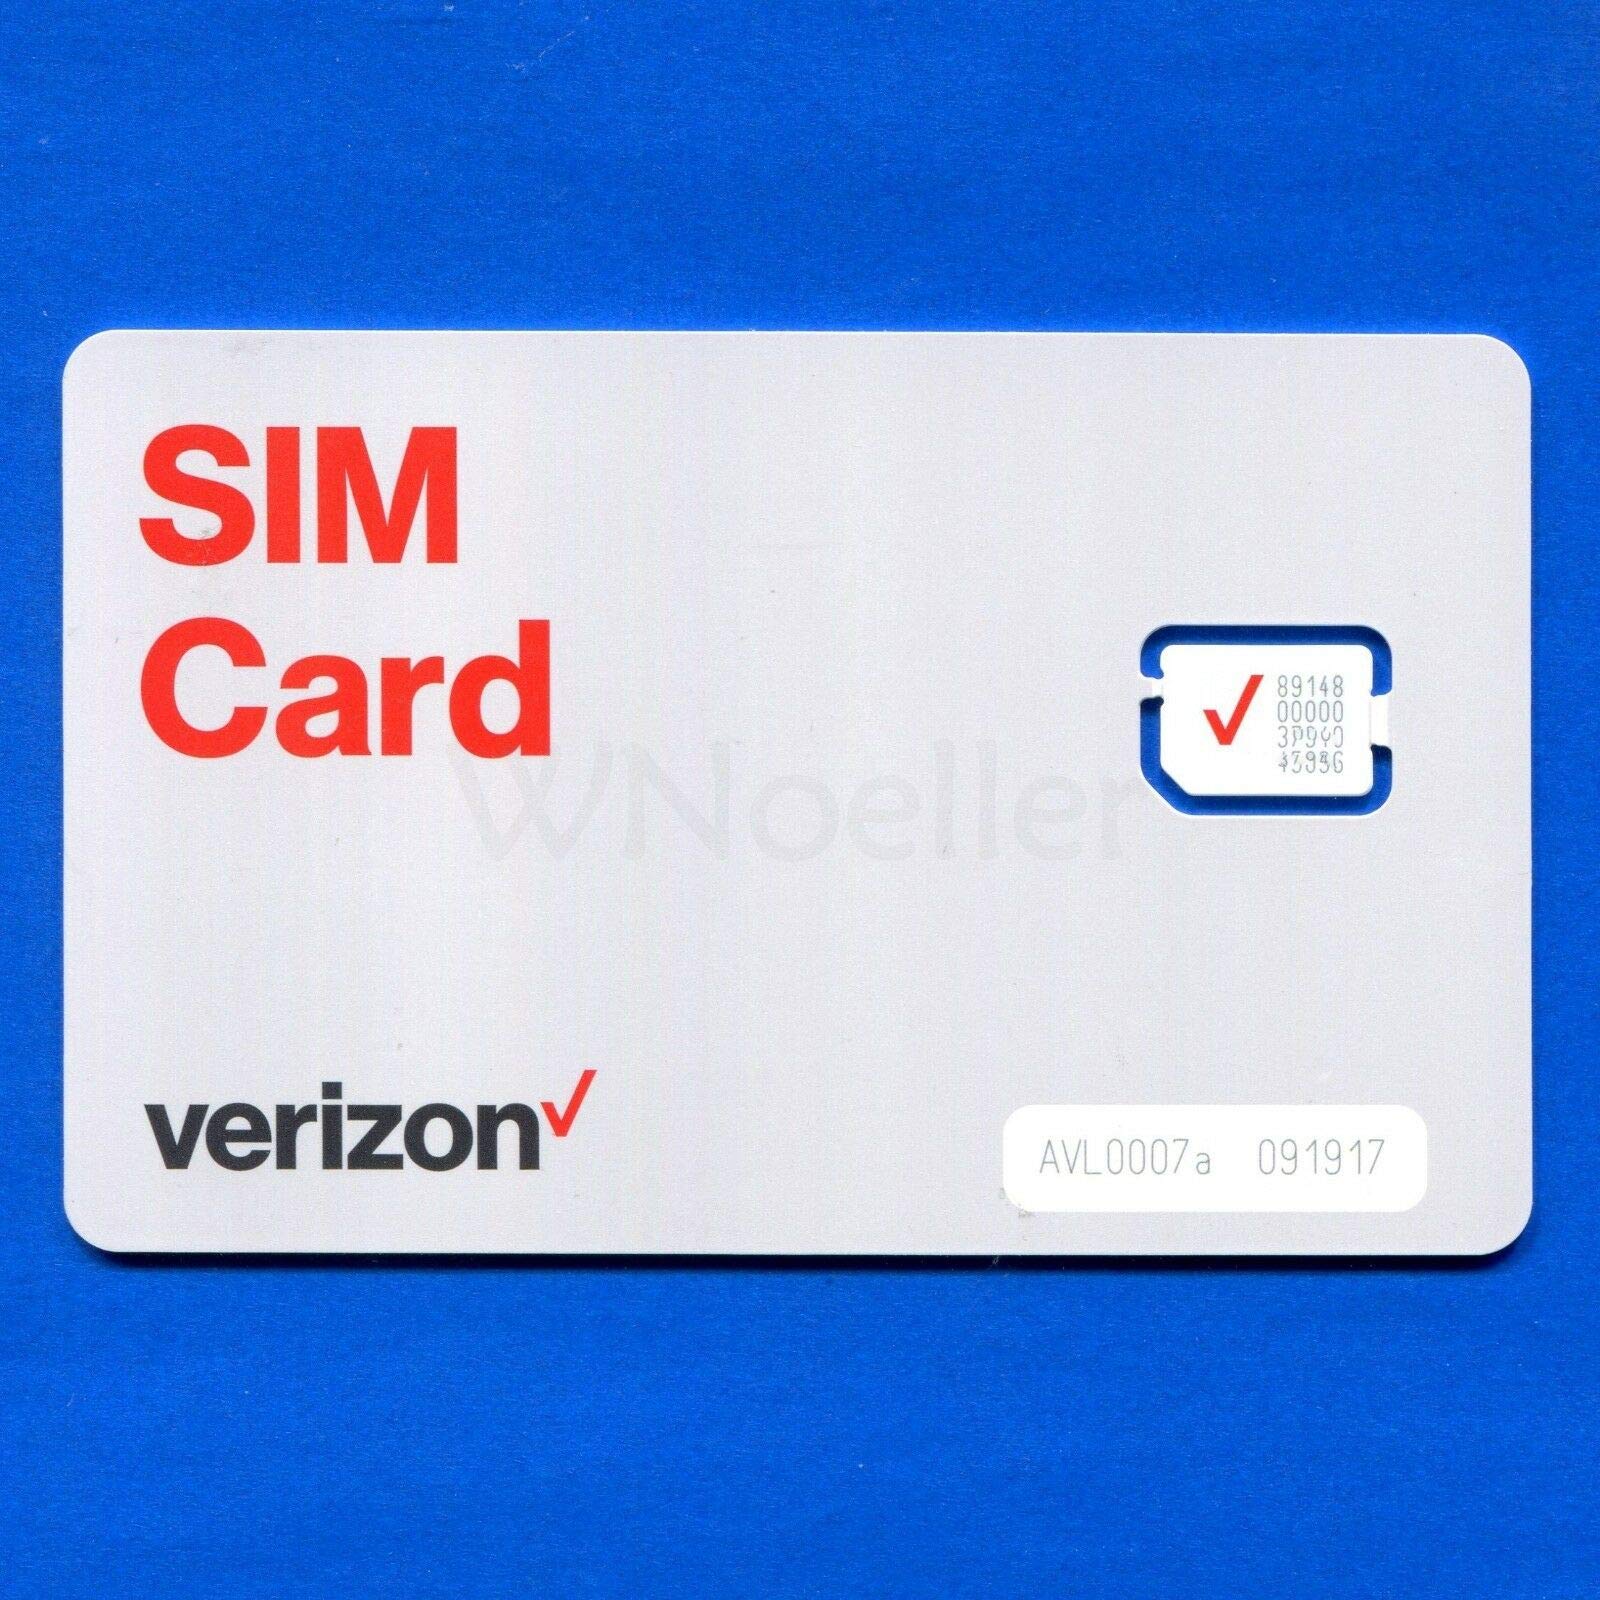 resolving-sim-card-is-not-from-verizon-message